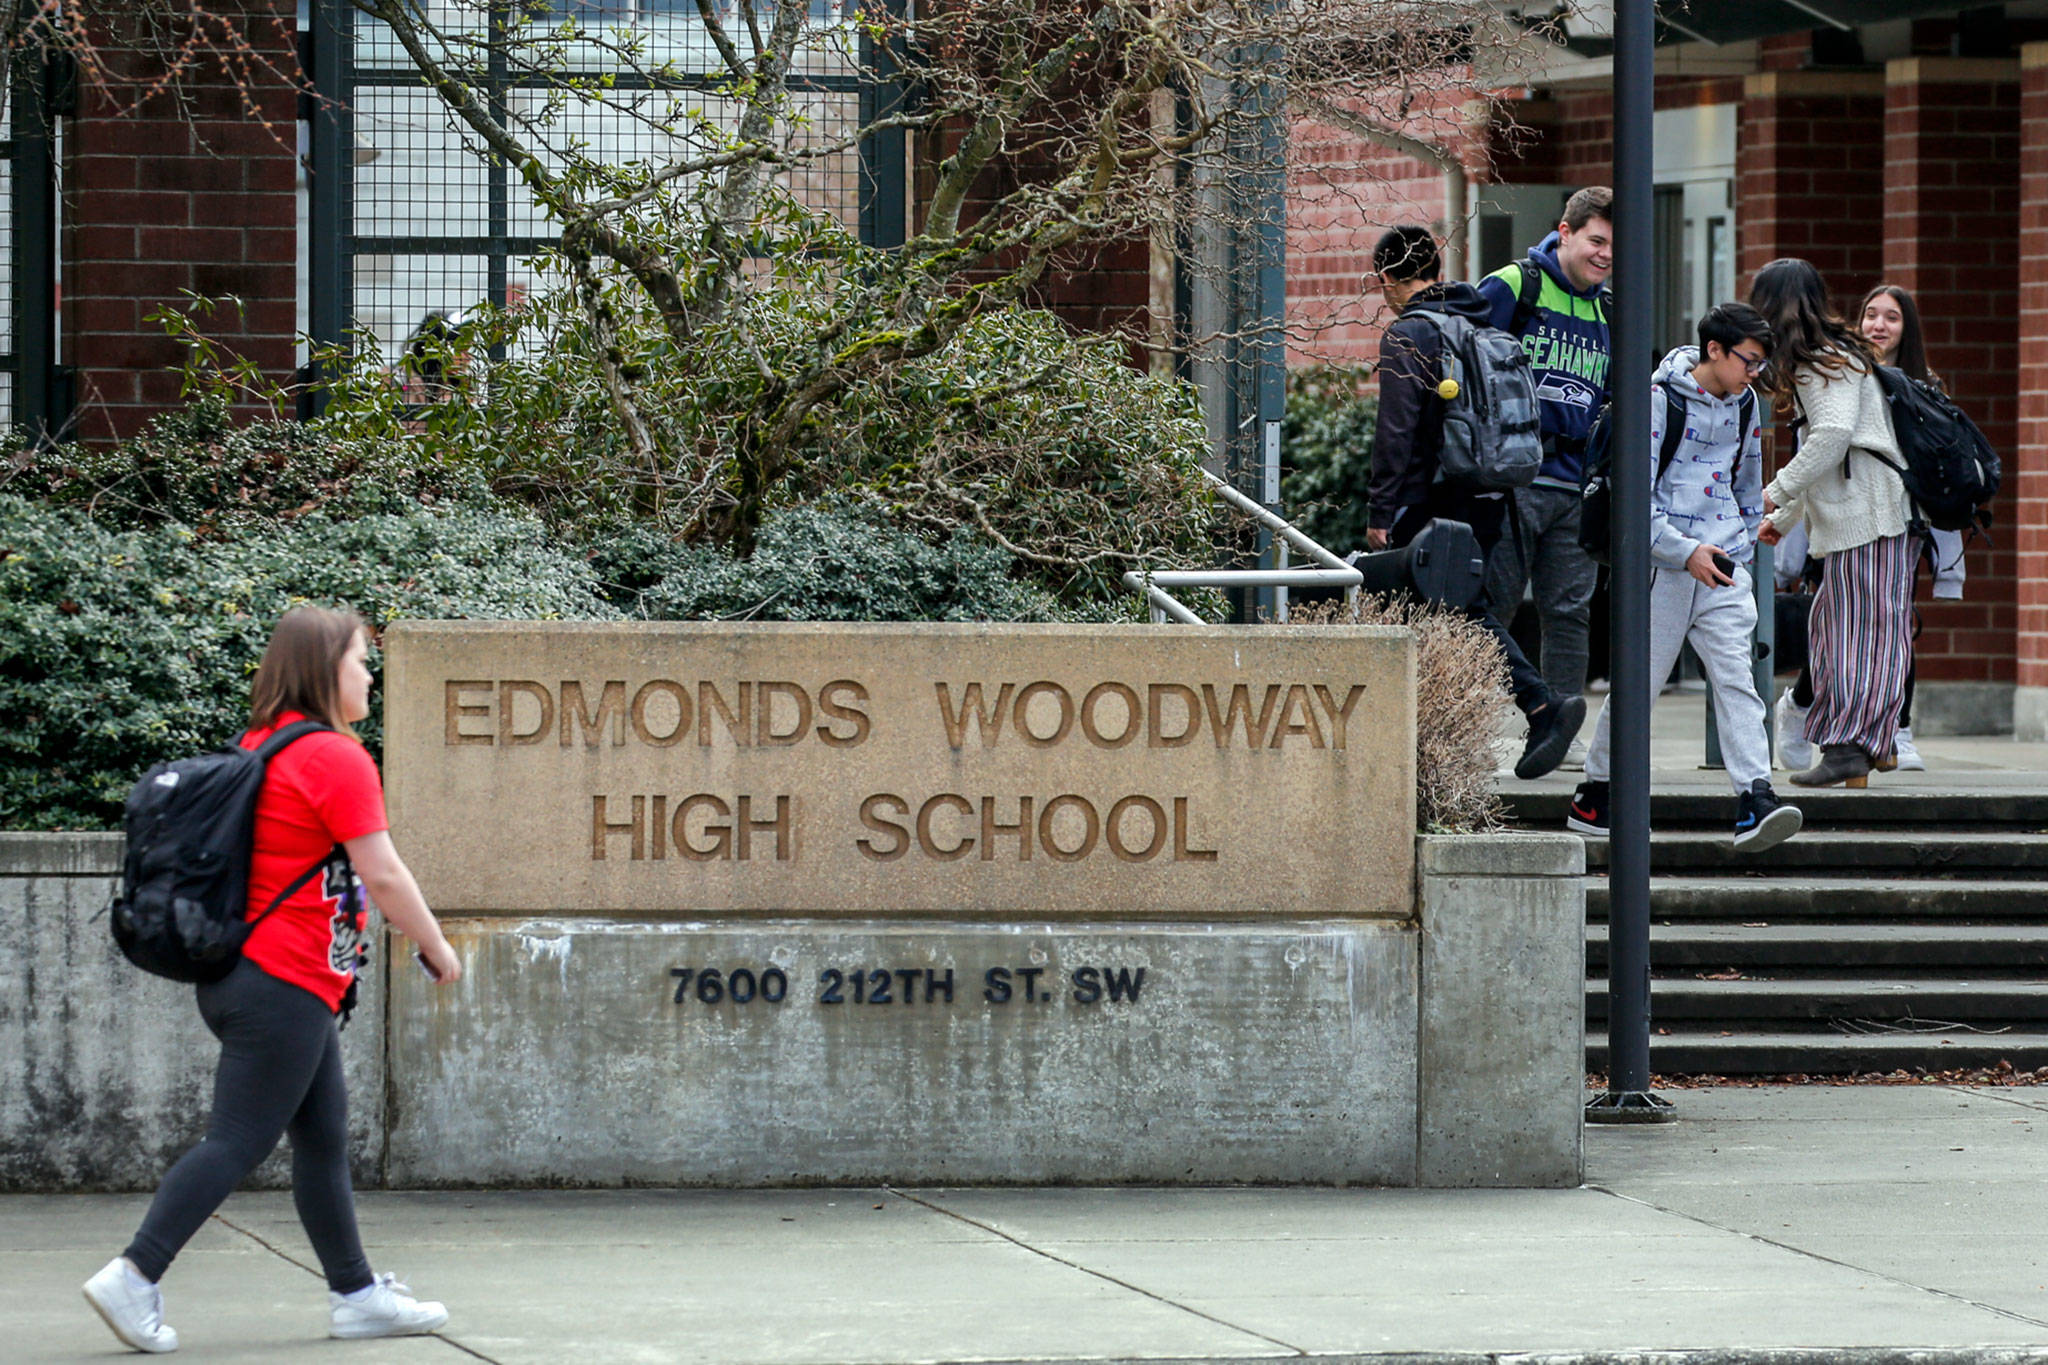 Students make their way after school at Edmonds-Woodway High School on Thursday. All public and private schools in Snohomish, King and Pierce counties must close for six weeks. (Kevin Clark / The Herald)